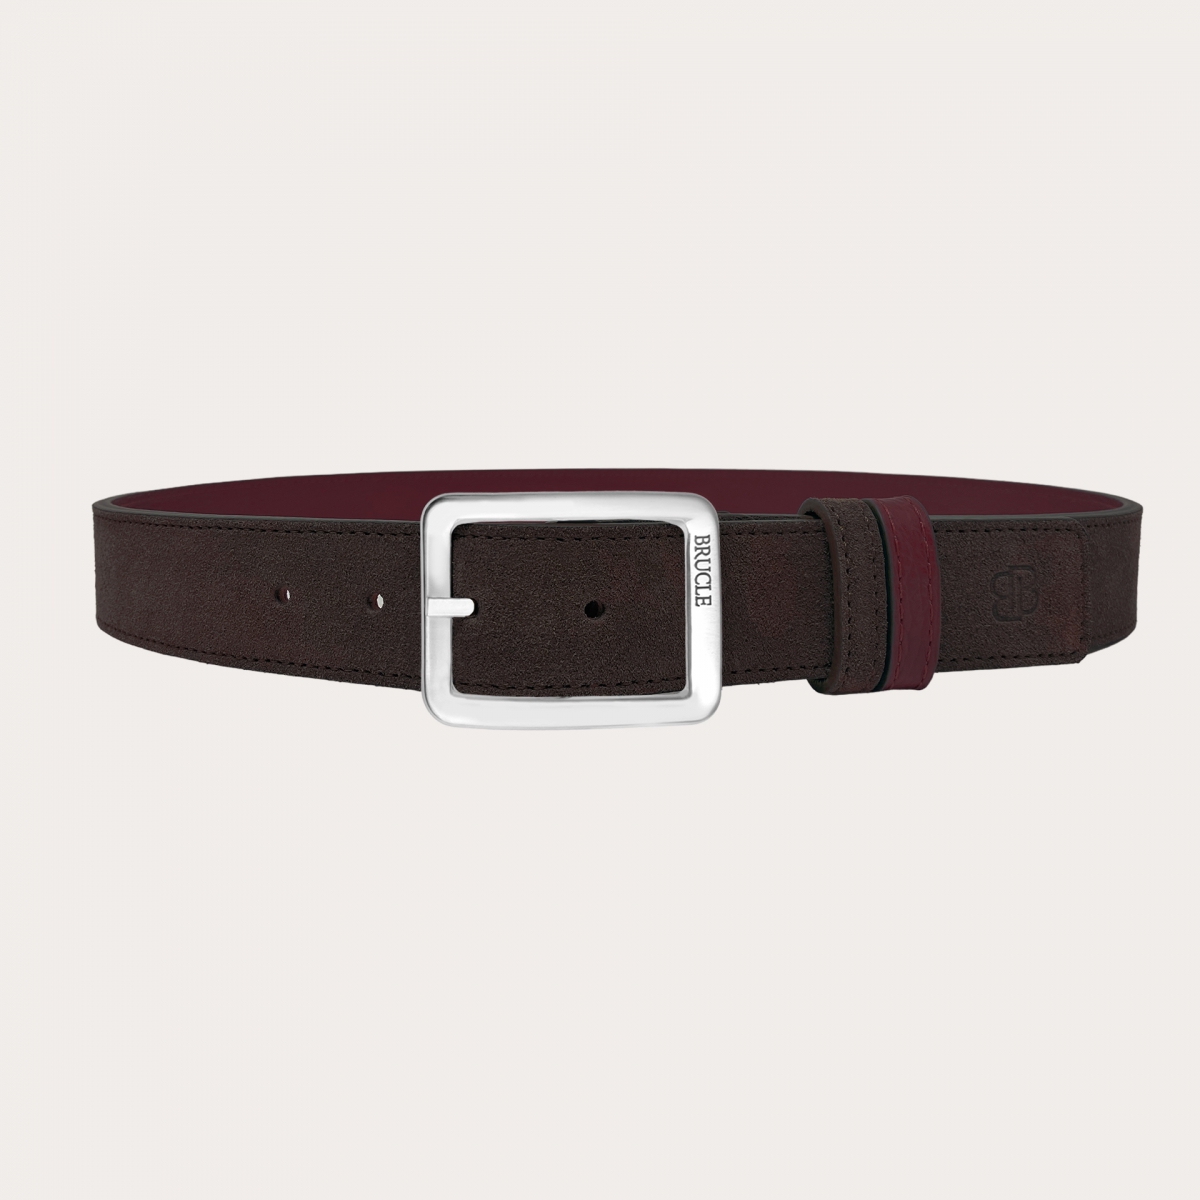 Reversible belt in dark brown suede and burgundy tumbled leather